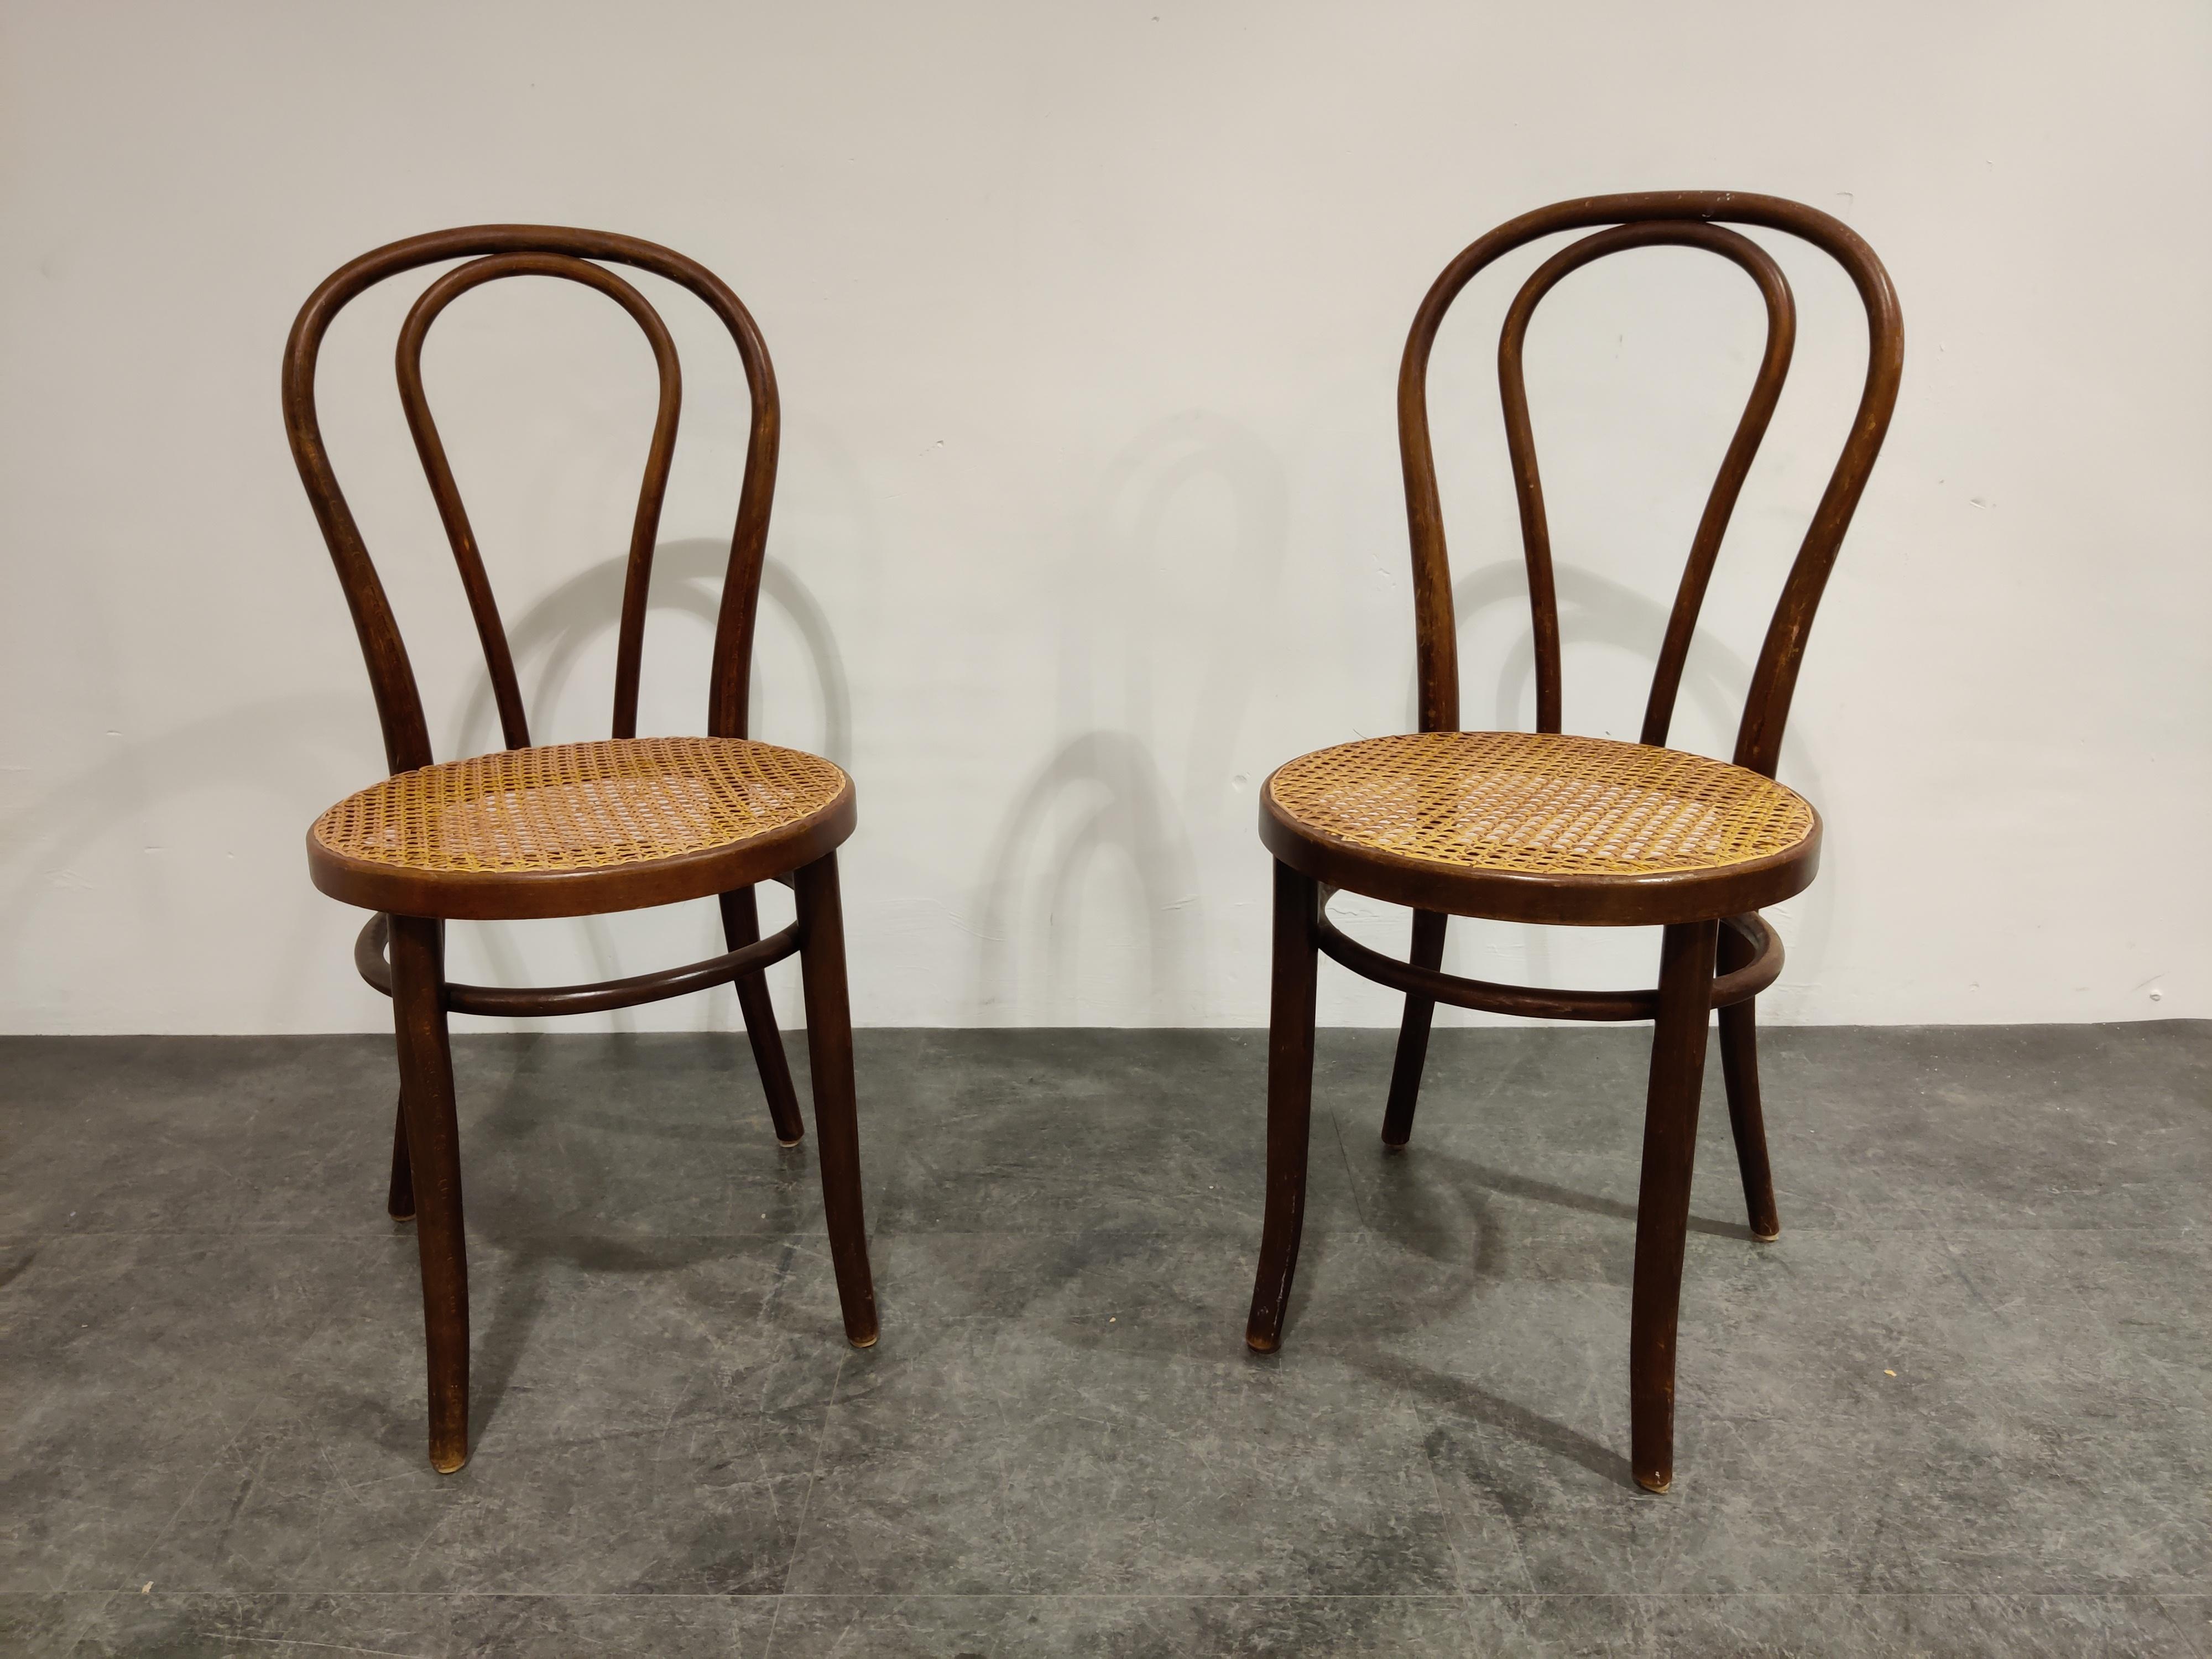 Pair of dark brown bentwooden dining chairs.

Stamped 'made in Romania'. 

We date them at early 1950s.

The cane seats are in good condition.

Dimensions:
Height 90cm/35